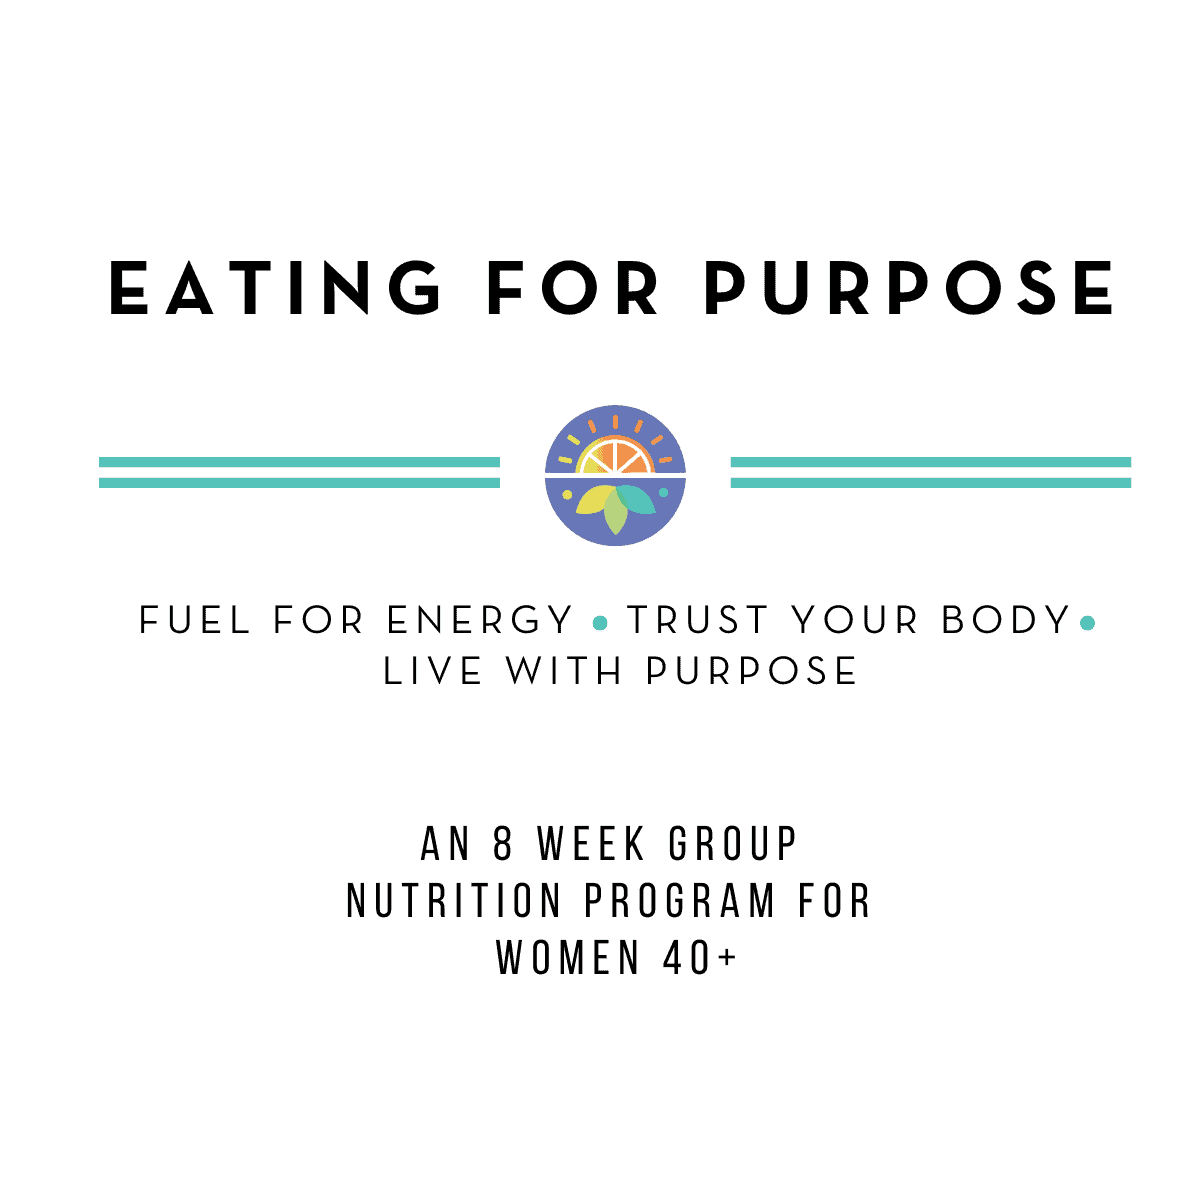 Eating for Purpose logo - Fuel for energy, trust your body, live with purpose